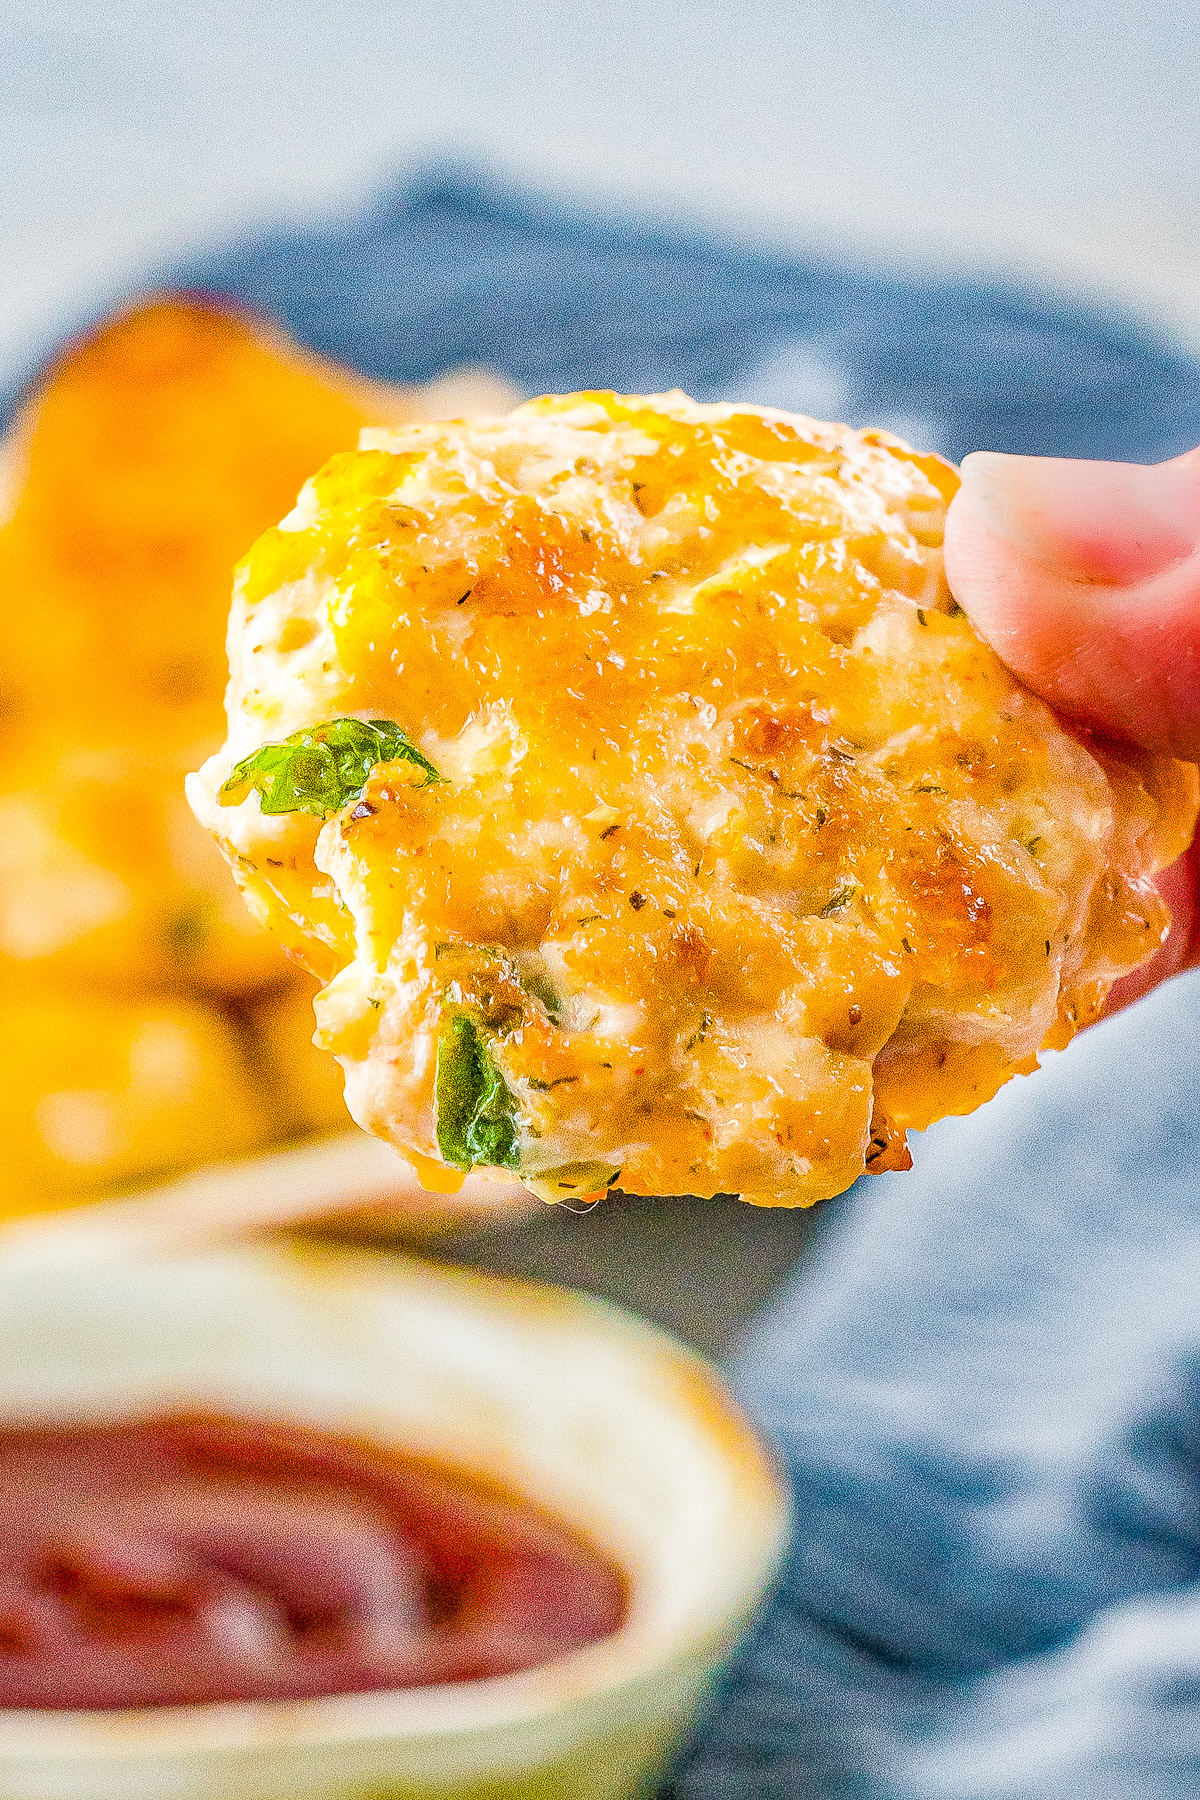 Cheesy Chicken Fritters - These AMAZING fritters include tender and juicy chicken, mozzarella and cheddar cheeses, and an array of spices to give them tons of great flavor! Serve them as an appetizer, on slider buns for sandwiches, or as the main dish! EASY, FAST, and a guaranteed family favorite!